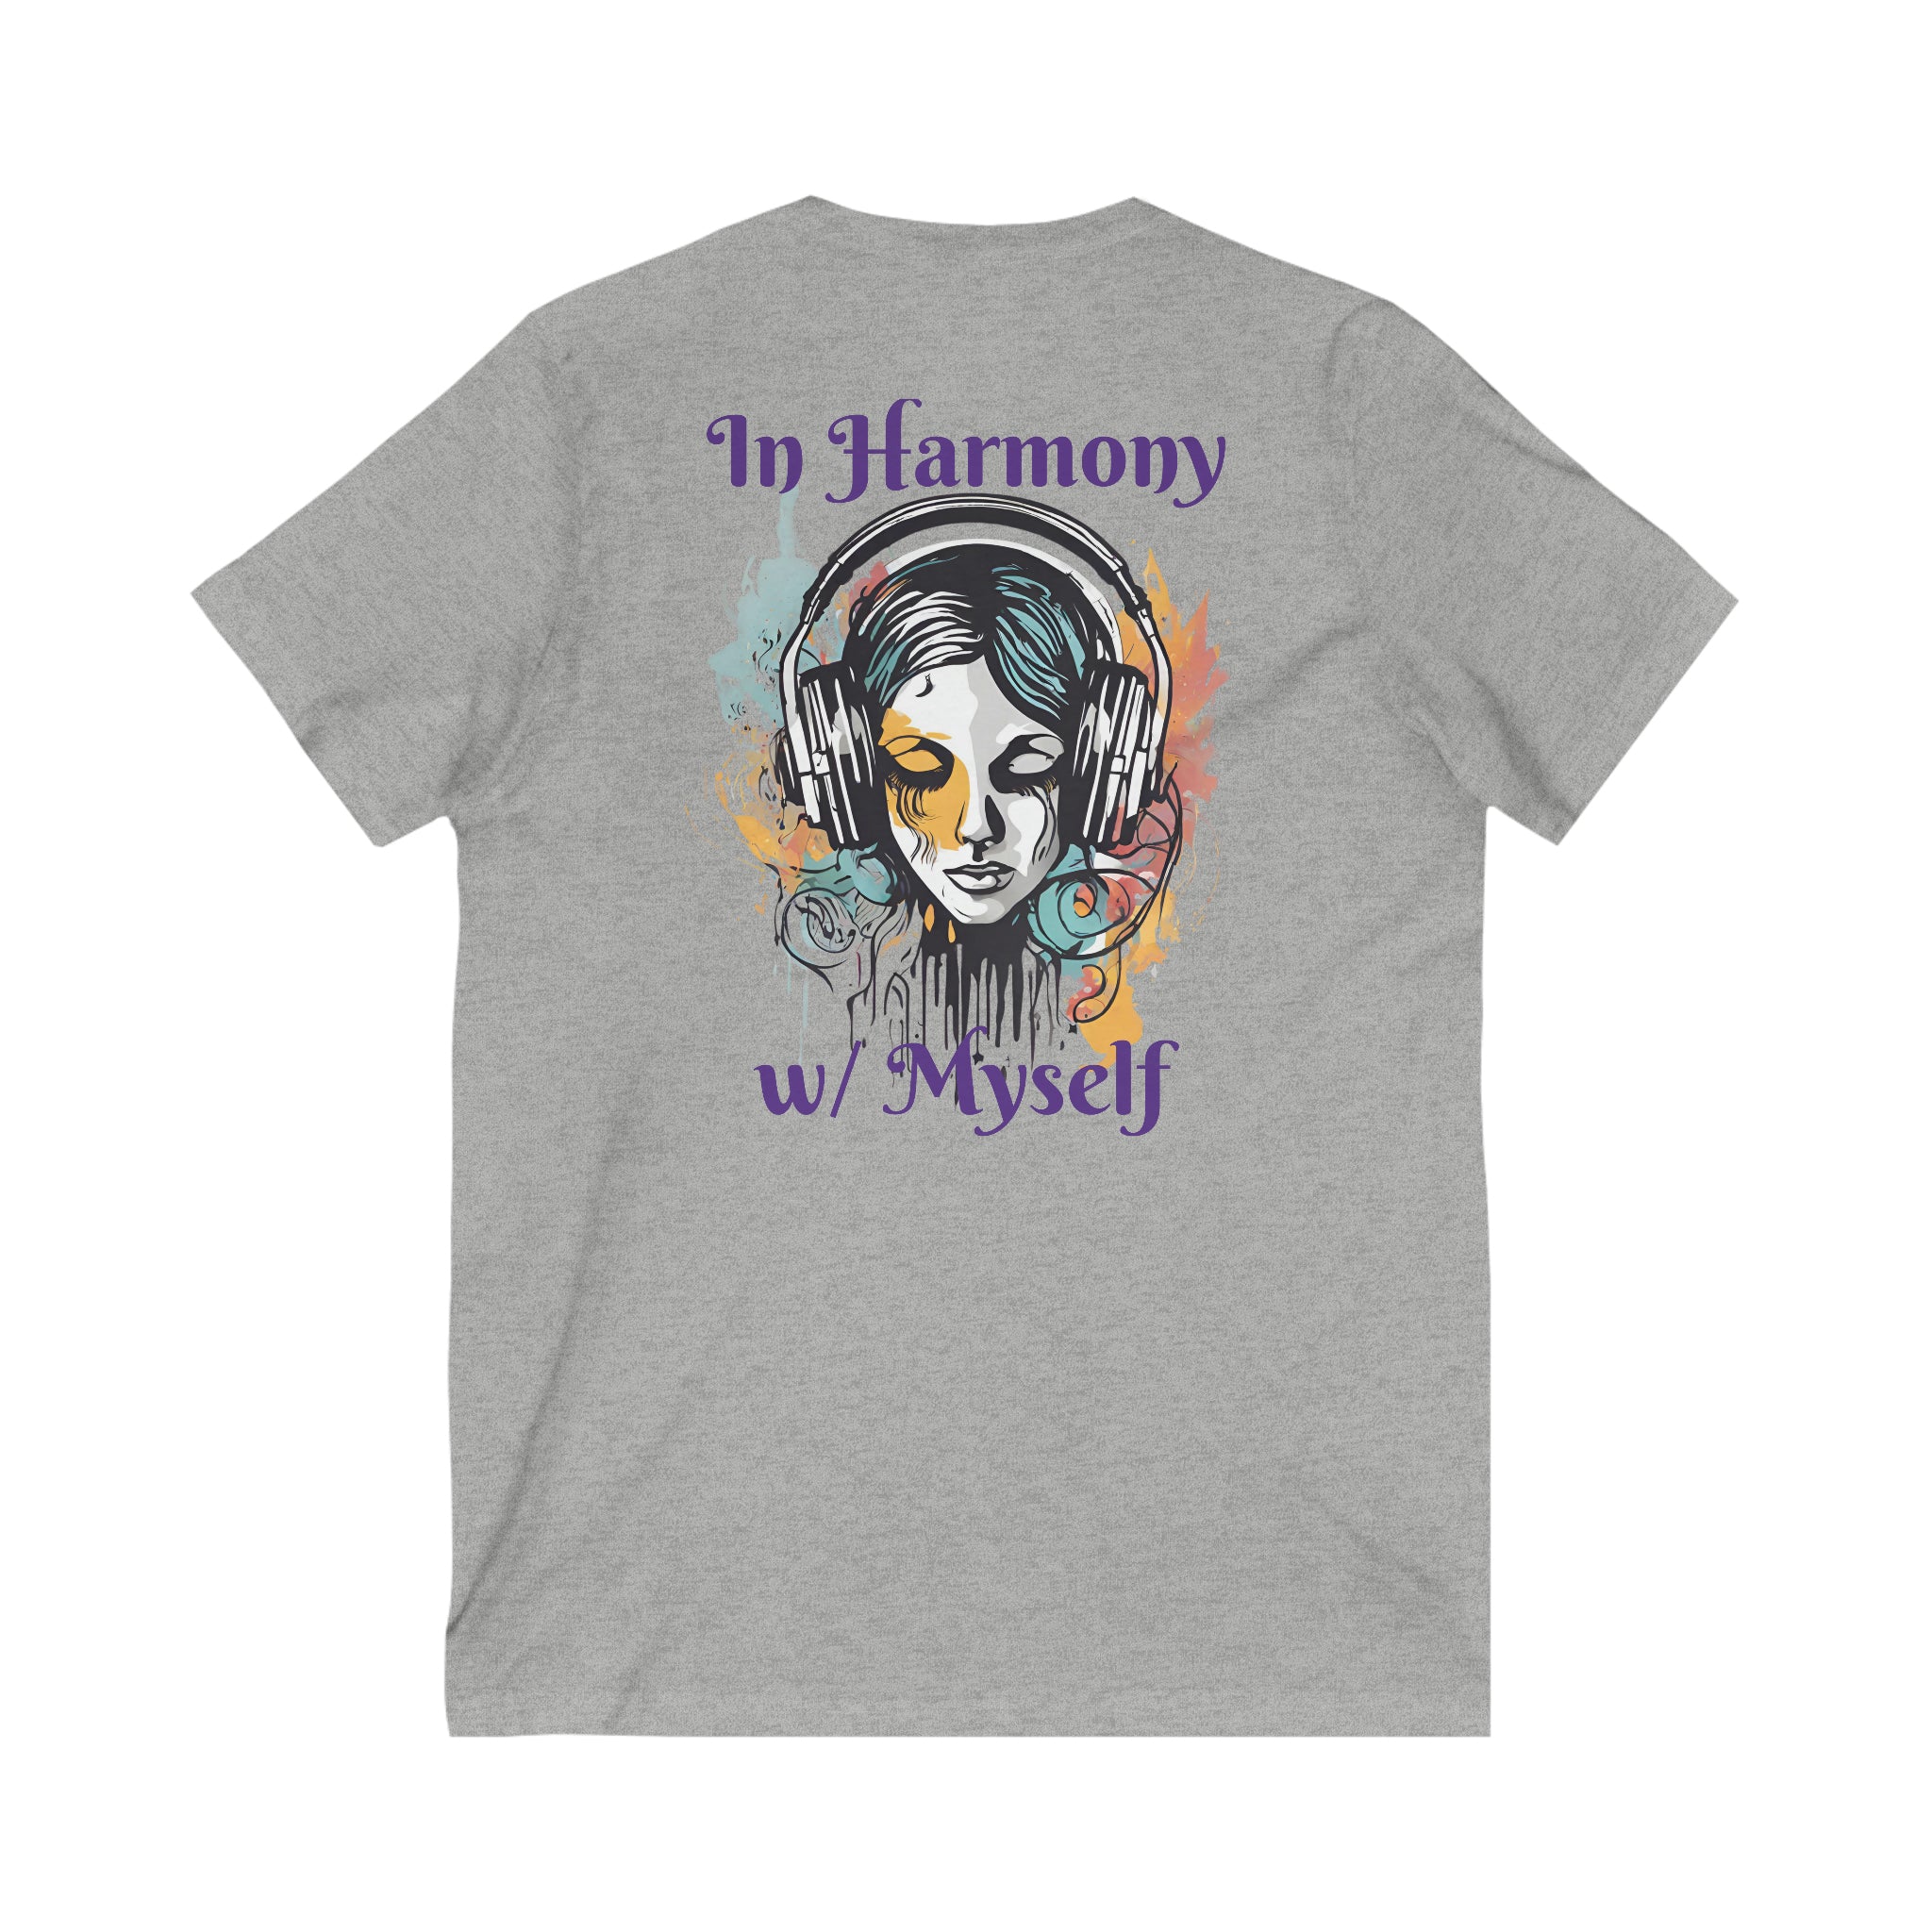 In Harmony w/ Myself Unisex Tee: Elevate awareness Athletic Heather Basic T-Shirt Casual Shirt Classic Tee Comfortable Tee Cotton T-Shirt Everyday Wear Graphic Tee Statement Shirt T-shirt Tee Collection Tee for all Tee for Men Tee for Women Unisex Apparel Vintage Tee V-neck 4733879647659892341_2048_3e73087a-f3e2-423b-a194-b67c737ff072 Printify